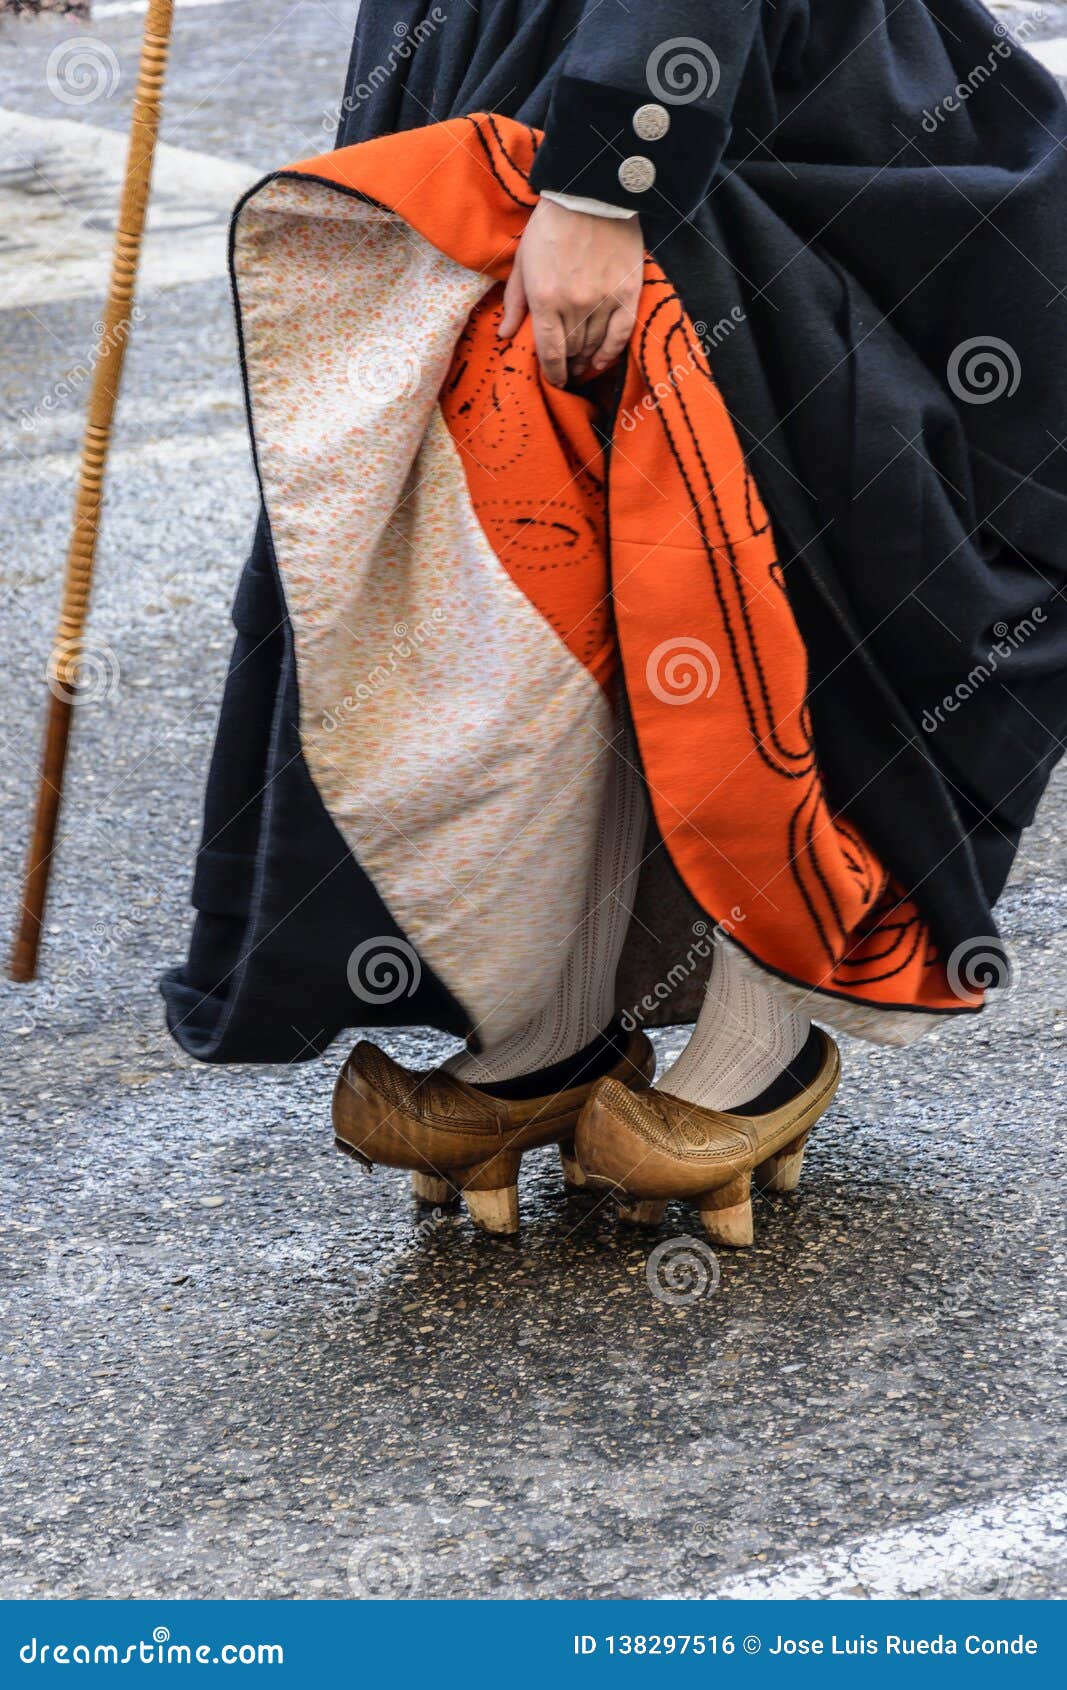 a woman fits motheries, rustic wooden shoes that were used in cantabria spain